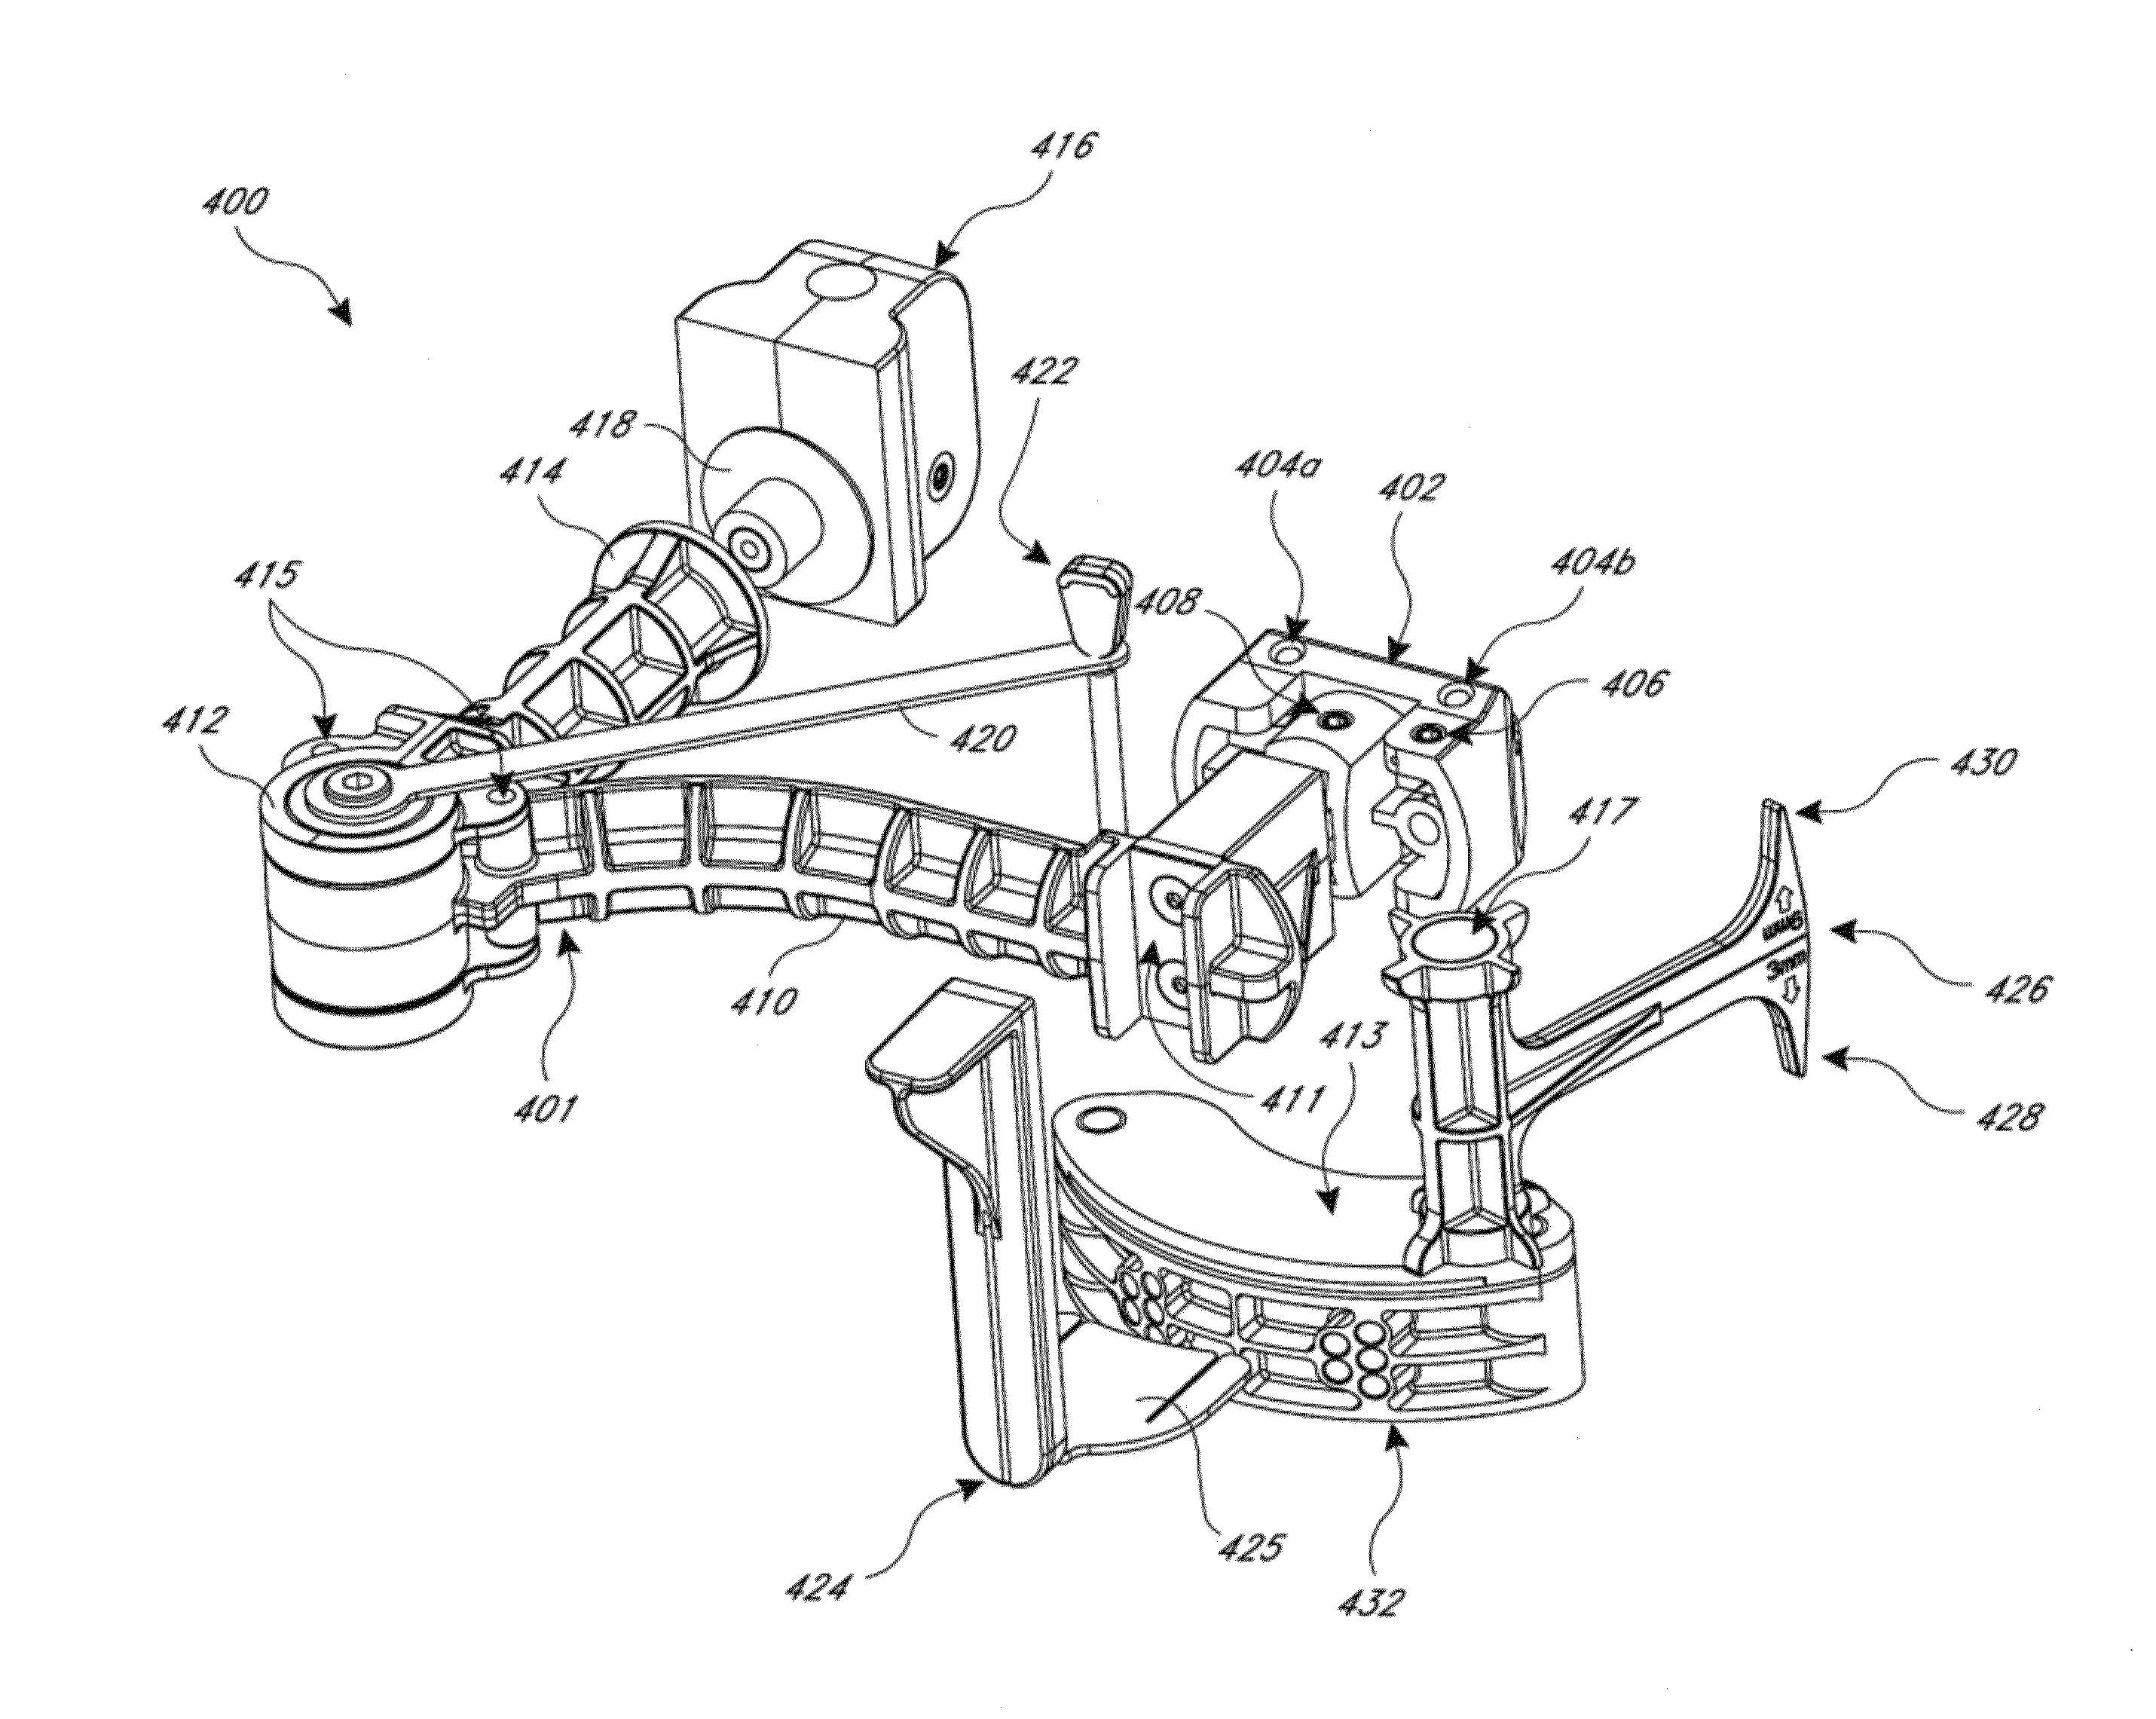 Bone positioning device and method